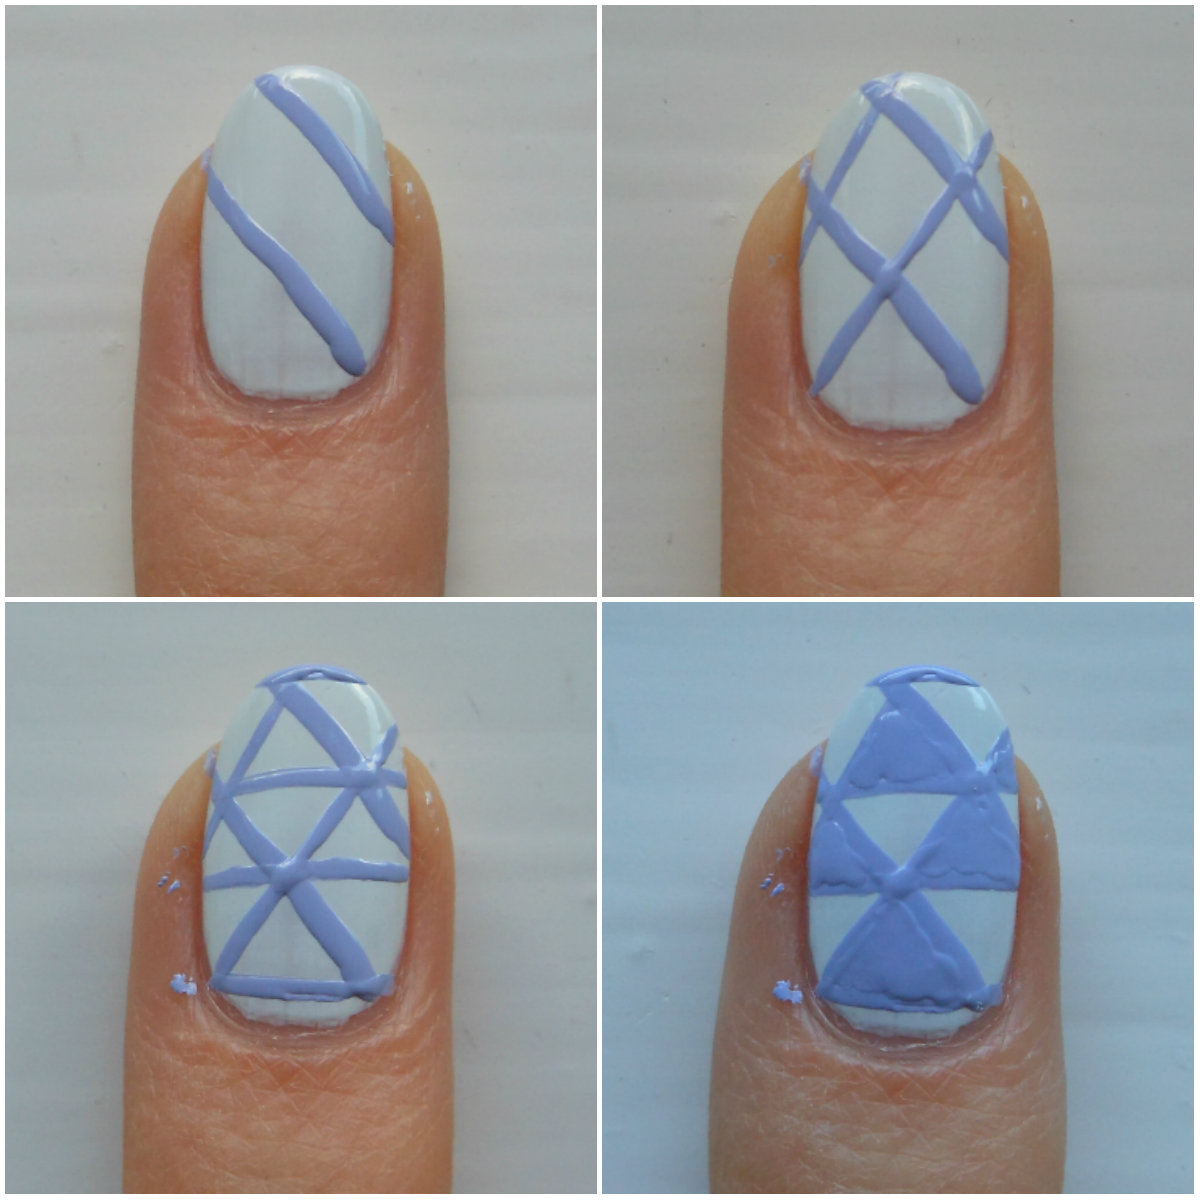 What Exactly Are Beau's Lines on Nails?